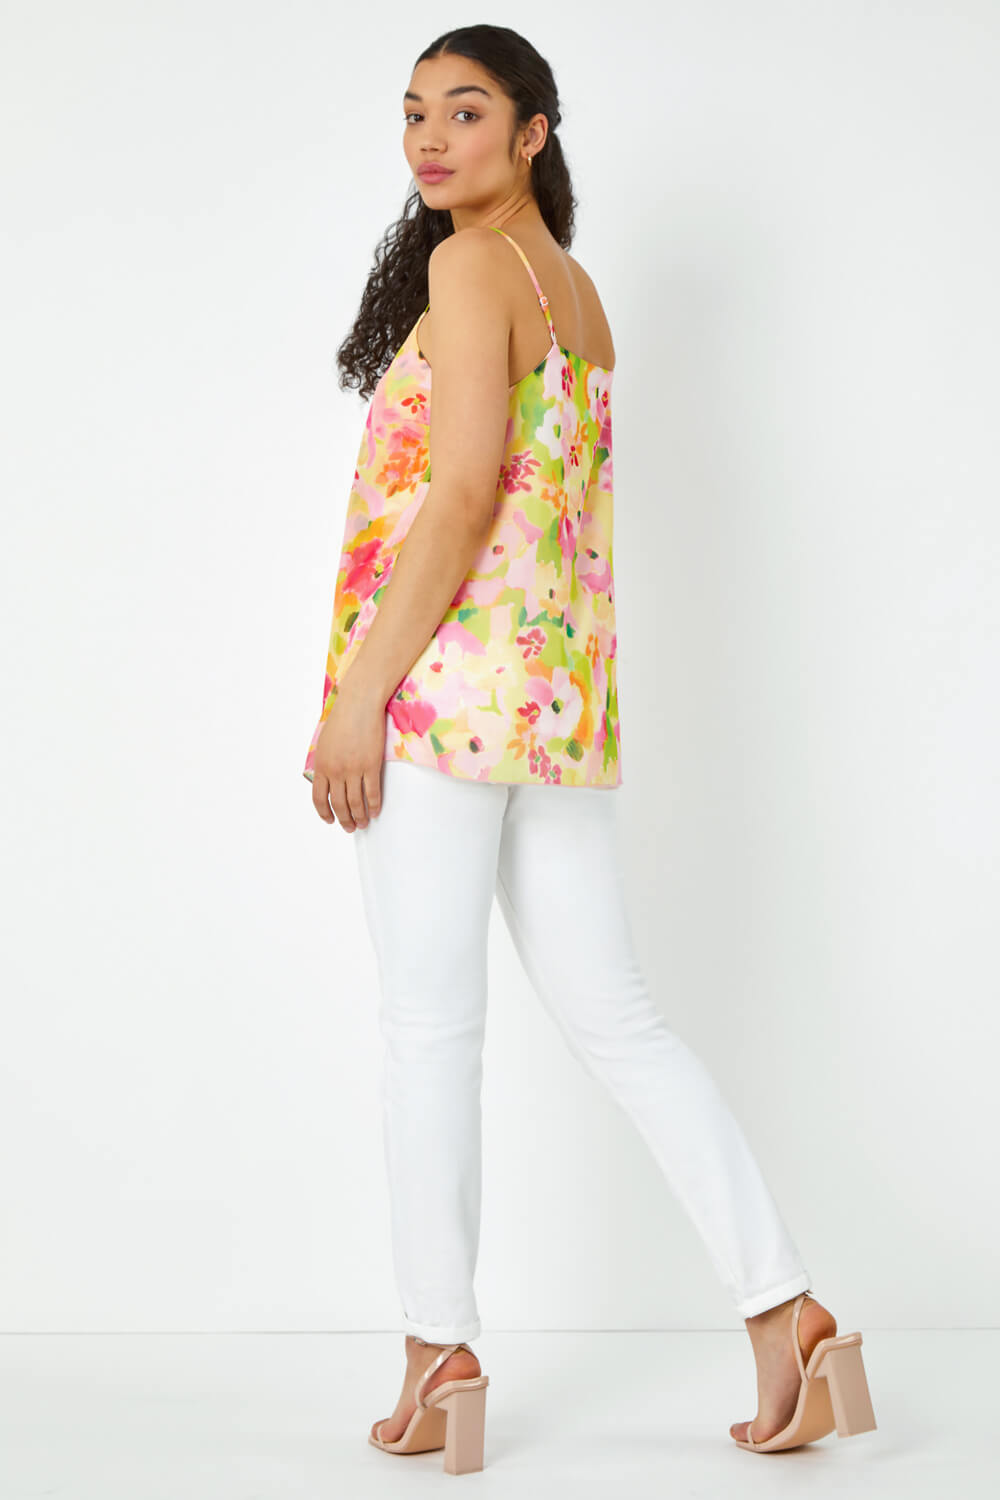 PINK Floral Print Double Layer Cami Top, Image 3 of 5